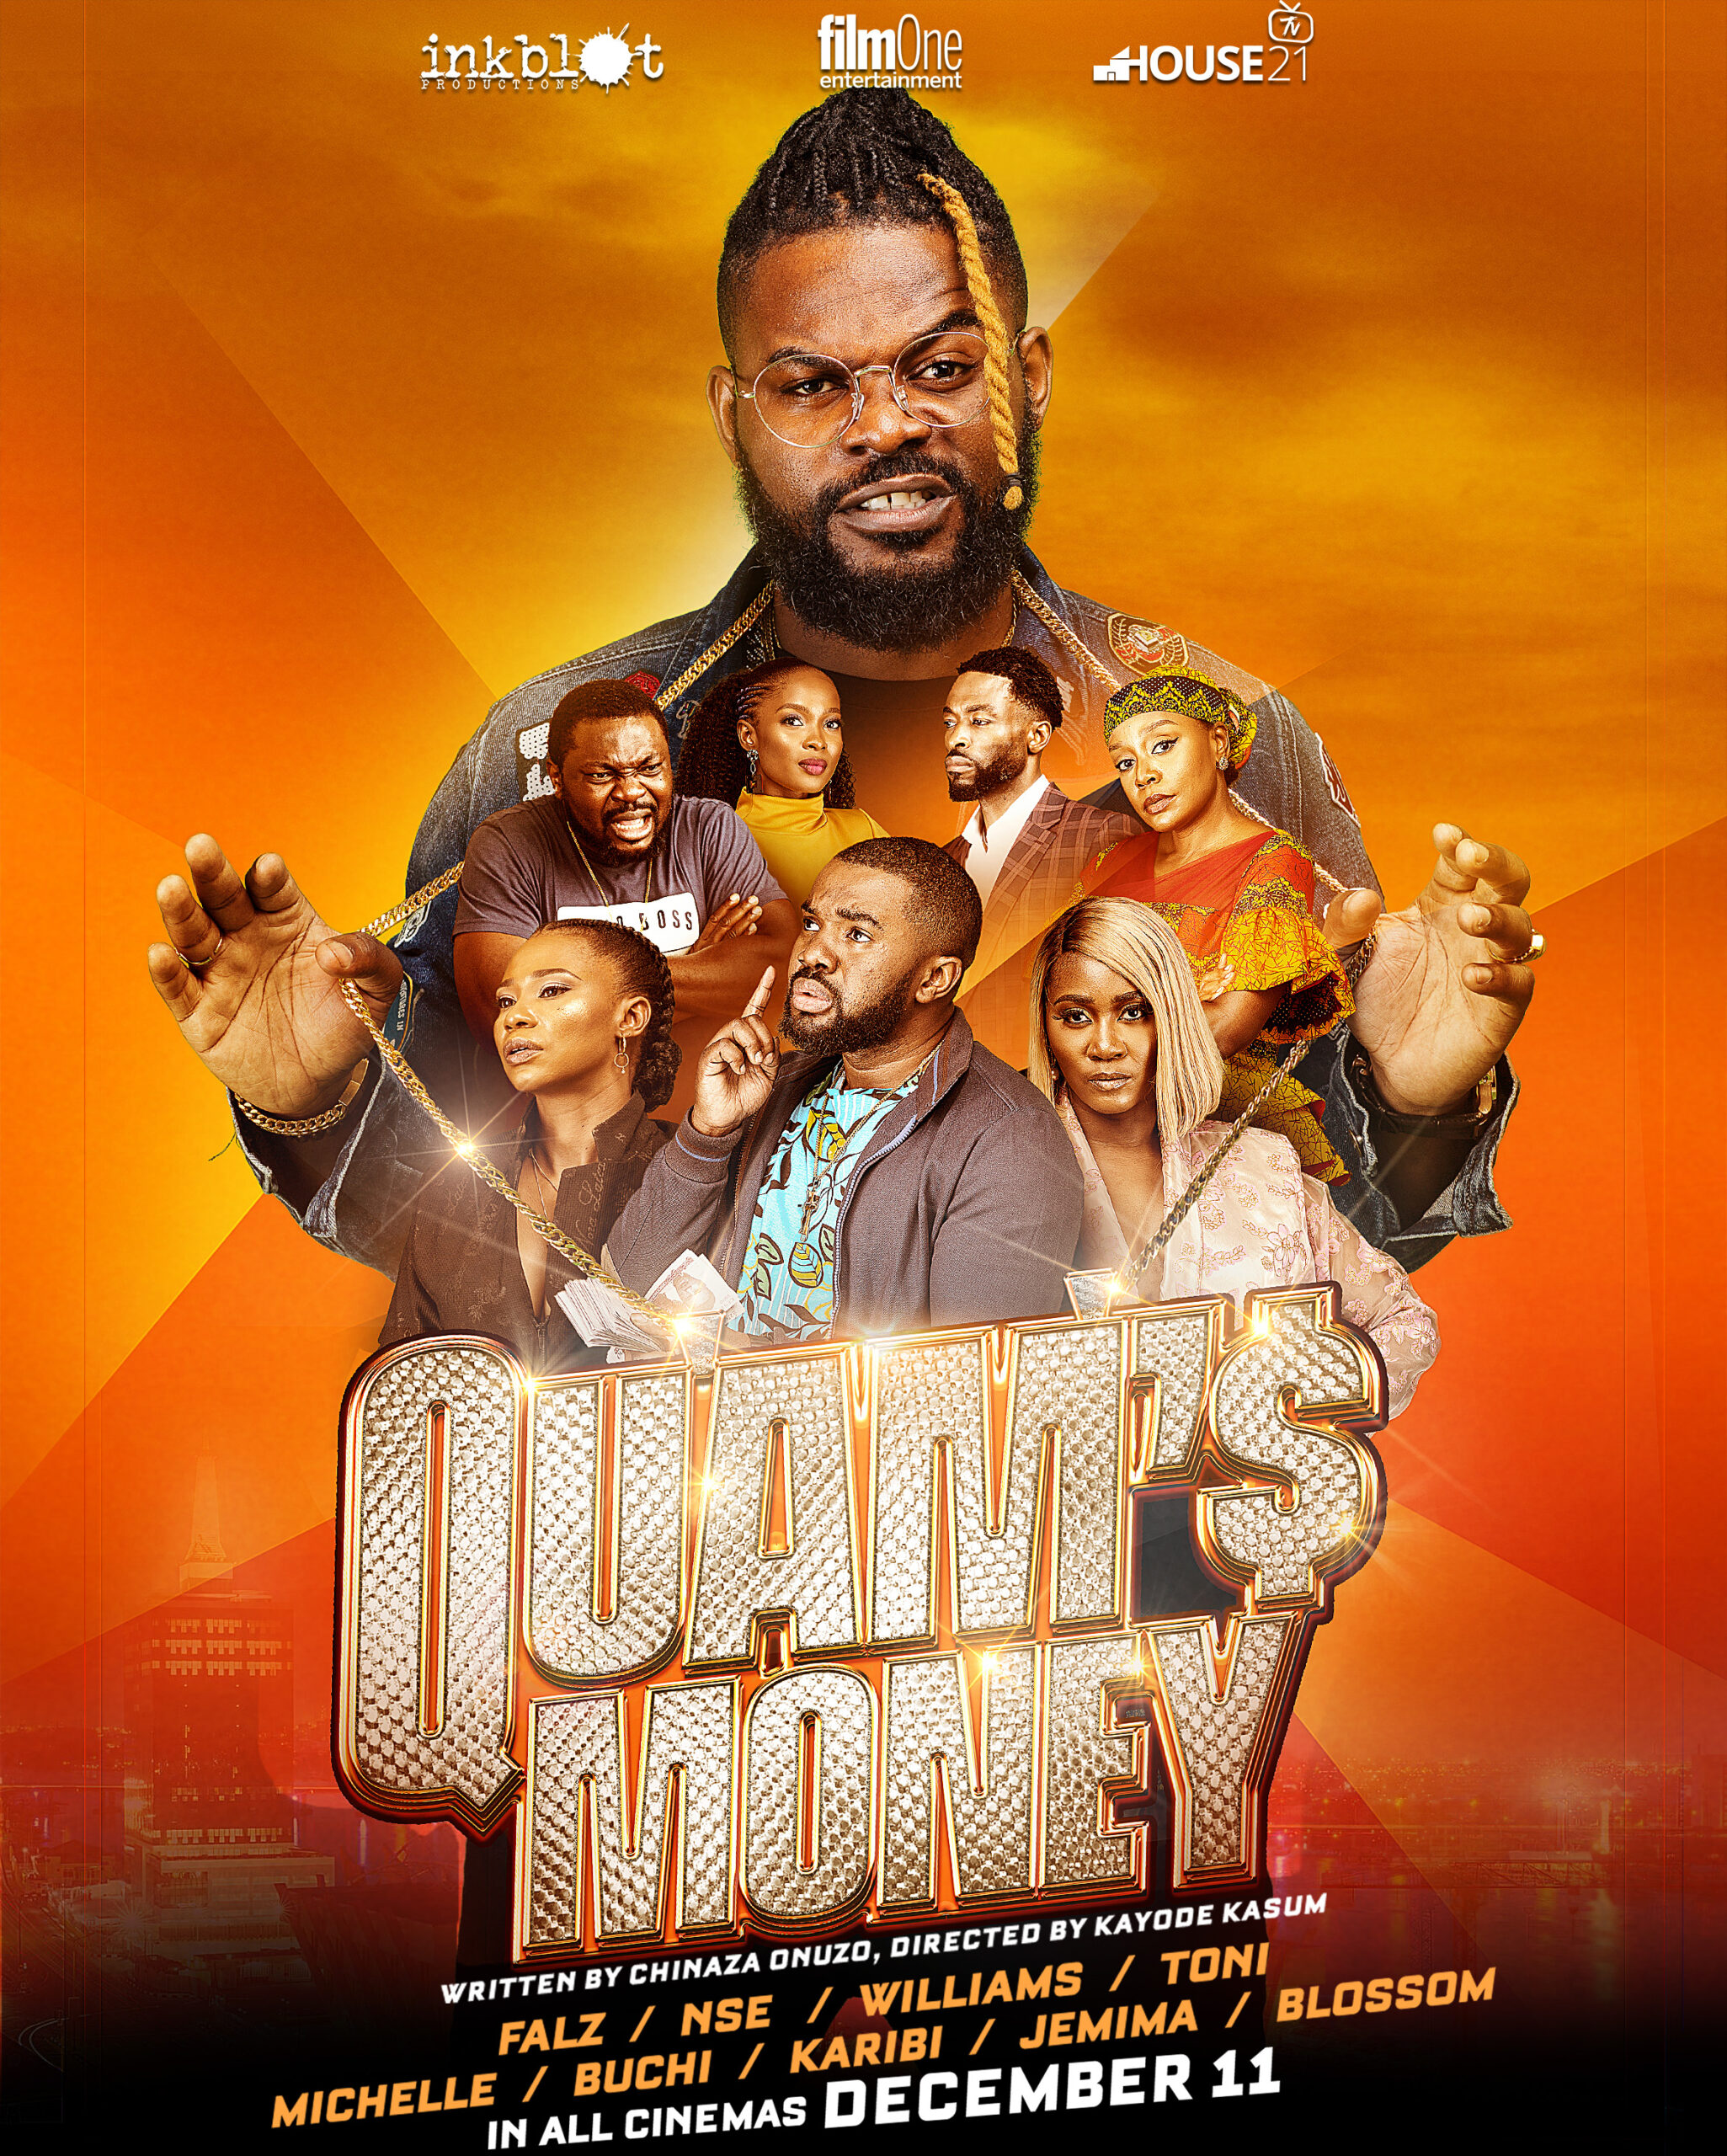 QM Static Poster scaled - Everything About "Falz The Bahd Guy" Debut Lead Feature - Quam’s Money